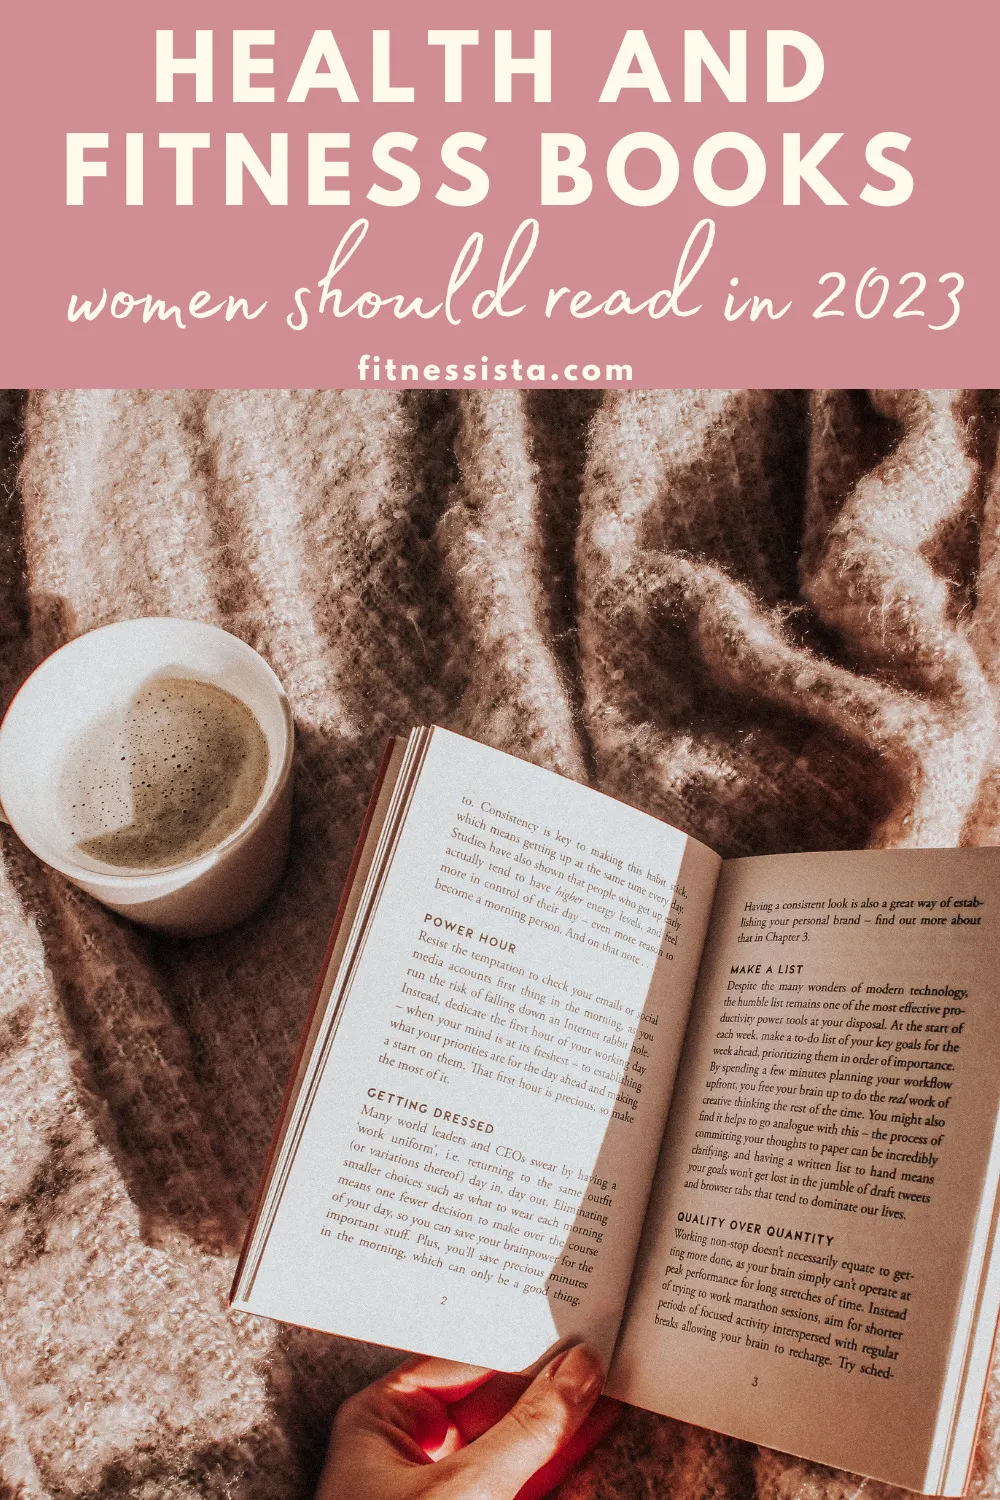 Health and fitness books women should read in 2023